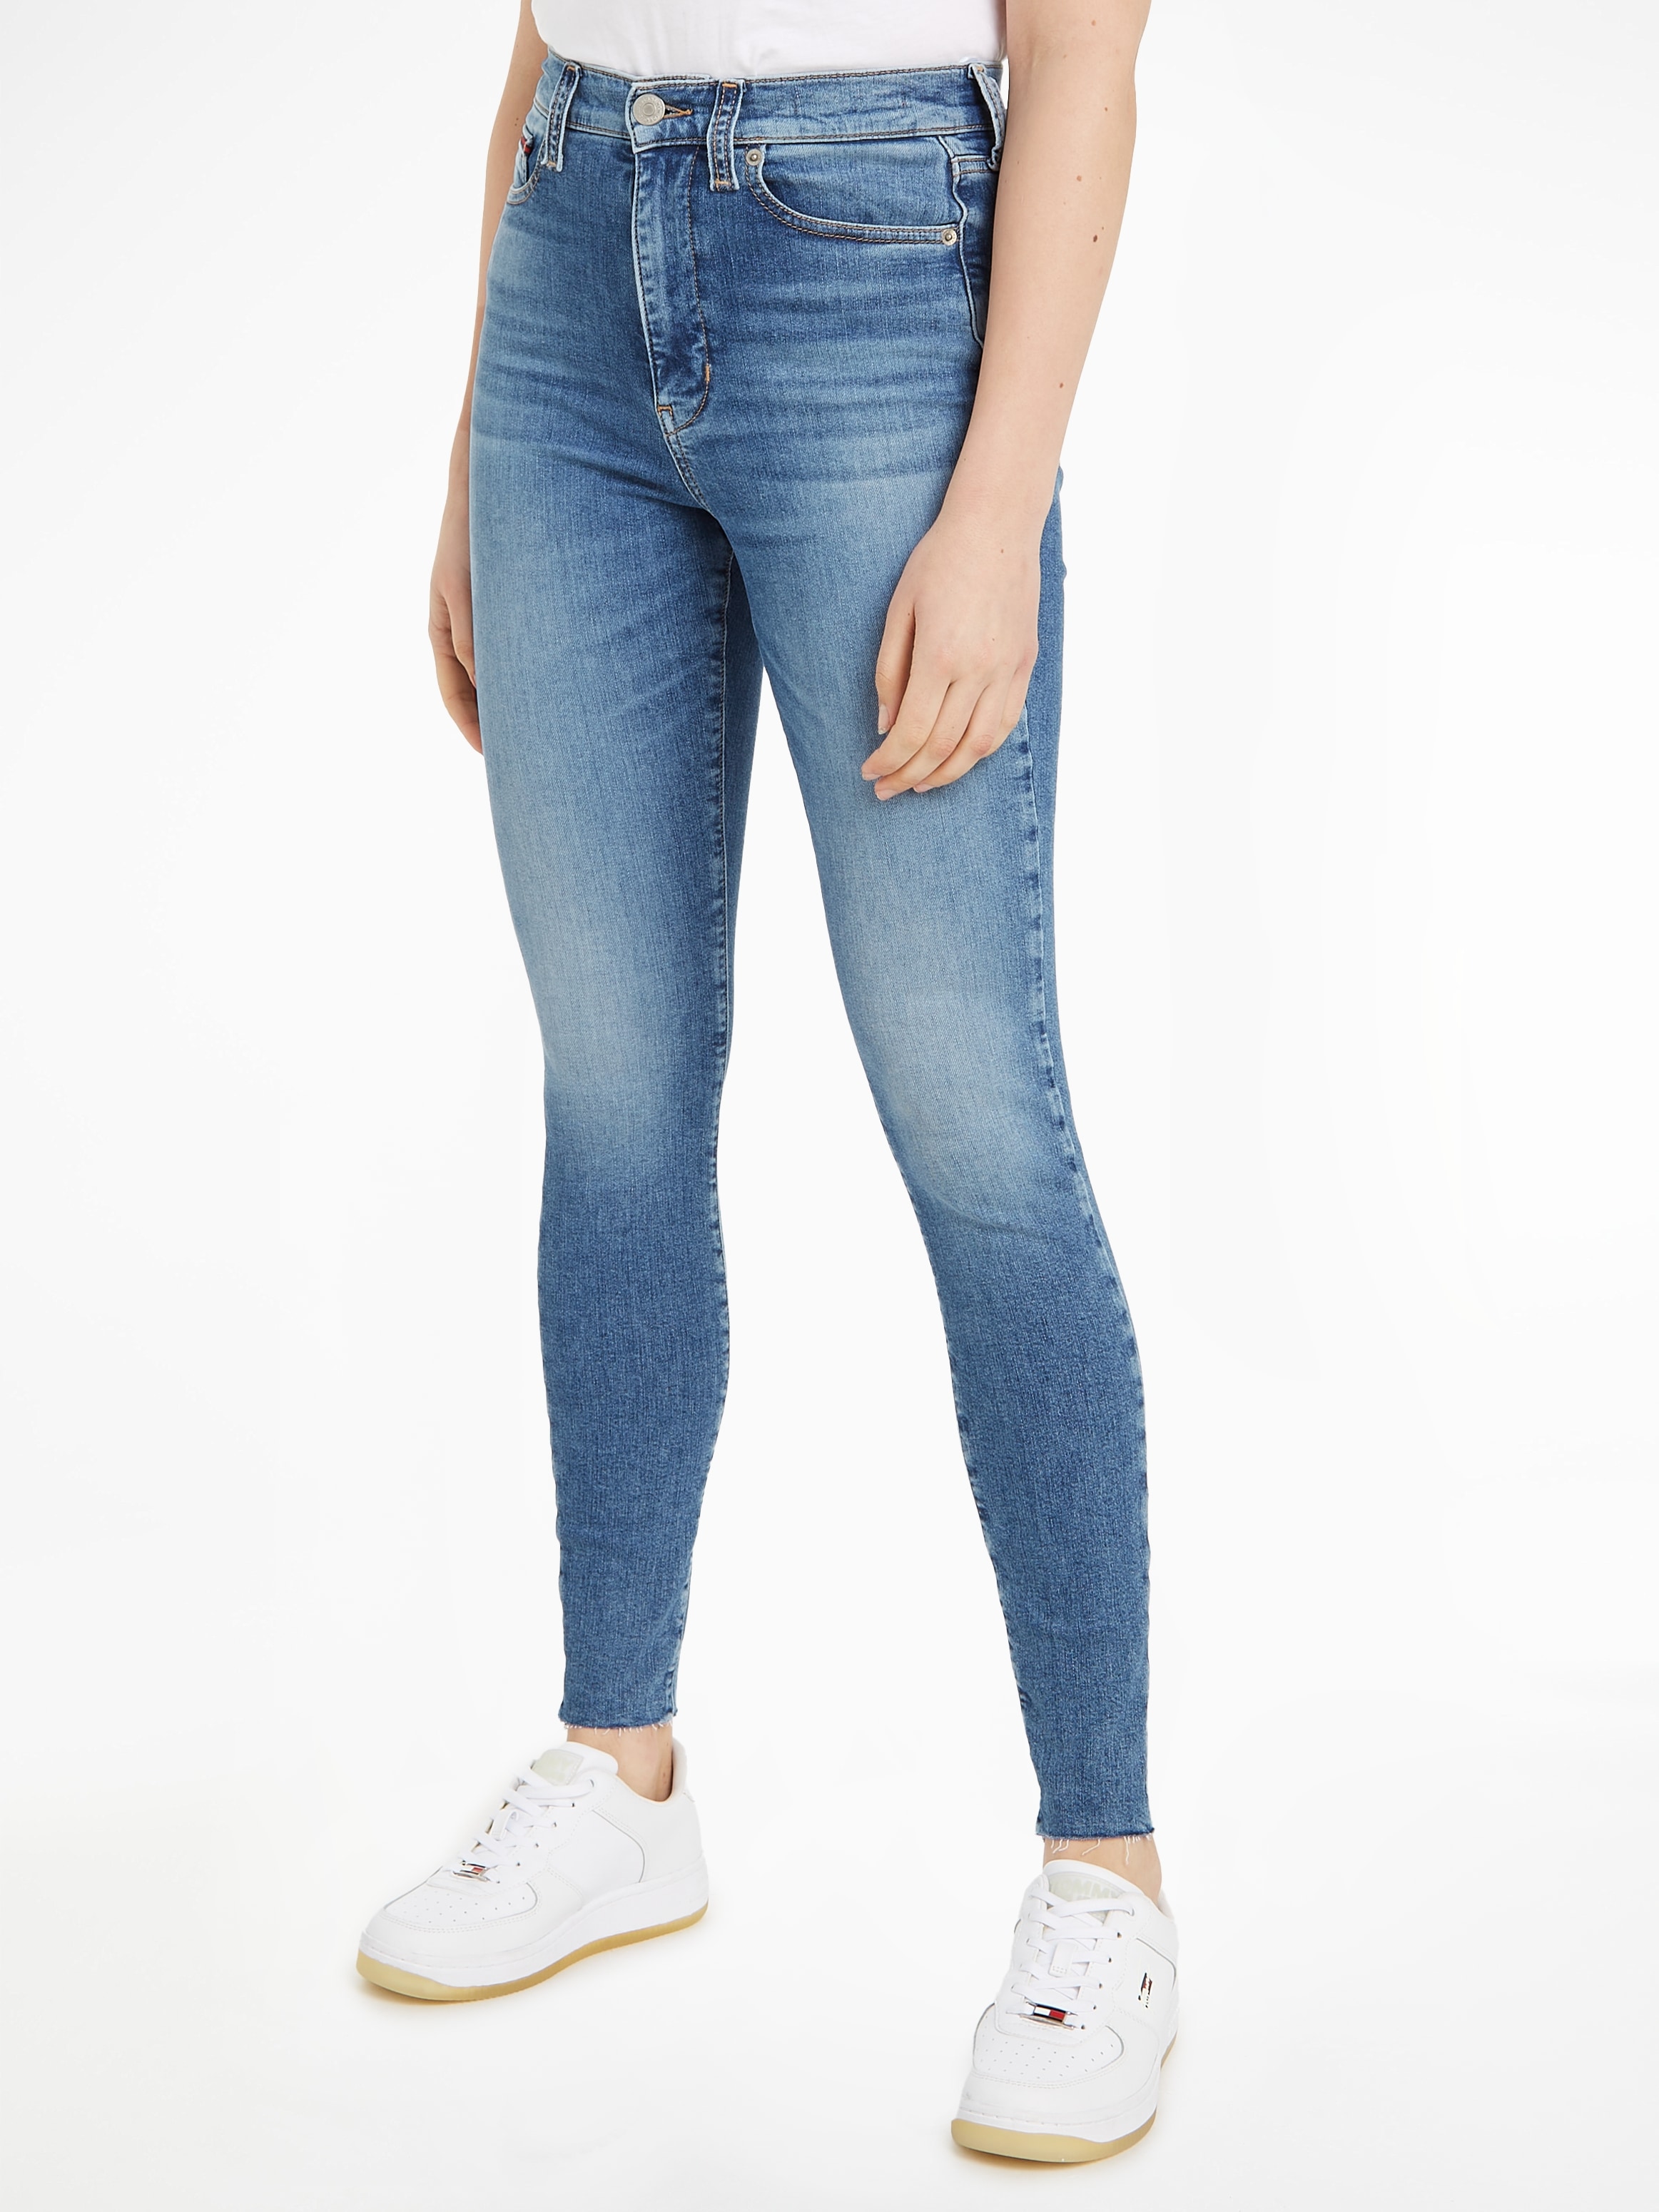 Tommy Jeans Skinny-fit-Jeans SYLVIA I\'m »Jeans | SSKN mit HR walking und Labelflags Logobadge CG4«, shoppen